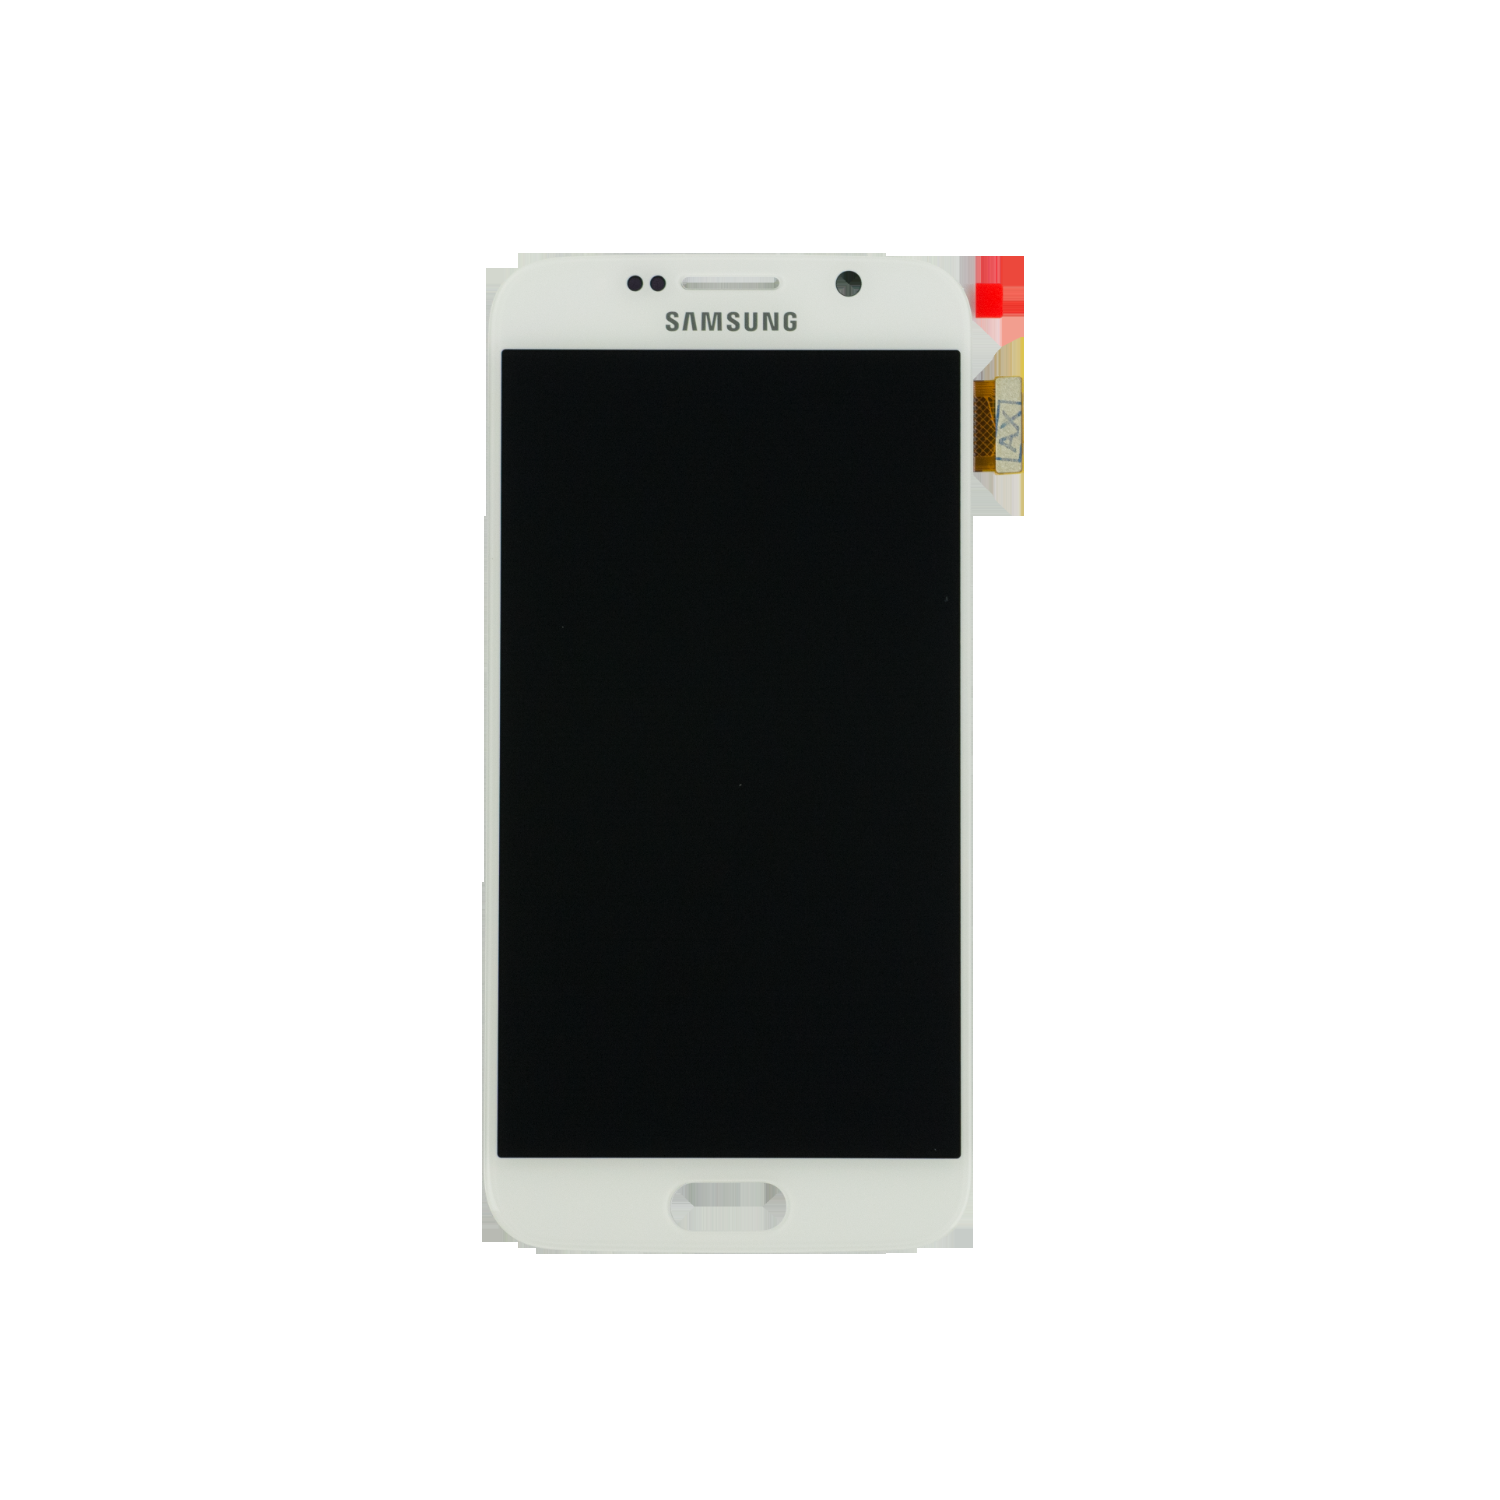 Replacement Part for Samsung Galaxy S6 LCD Screen and Digitizer Assembly - White